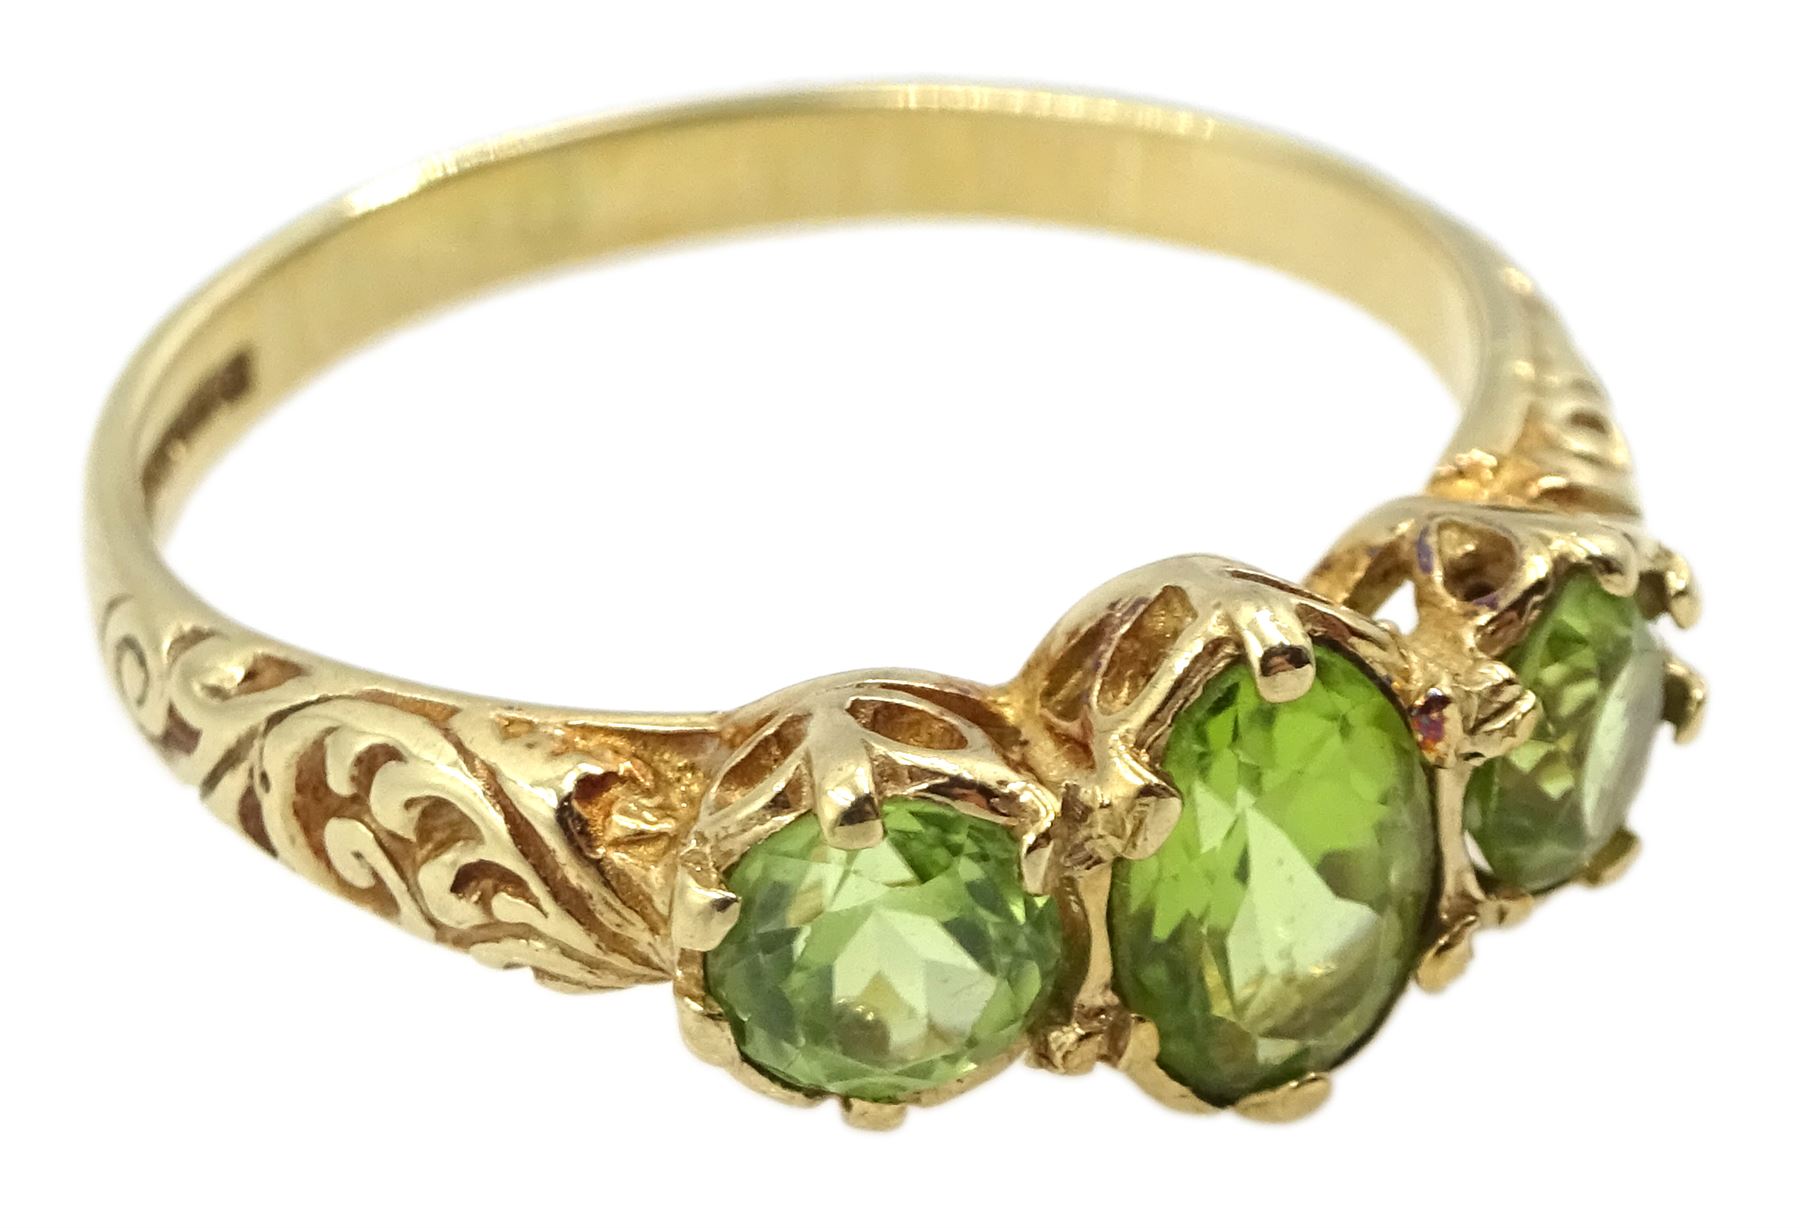 9ct gold three stone peridot ring with scroll design shoulders - Image 4 of 4